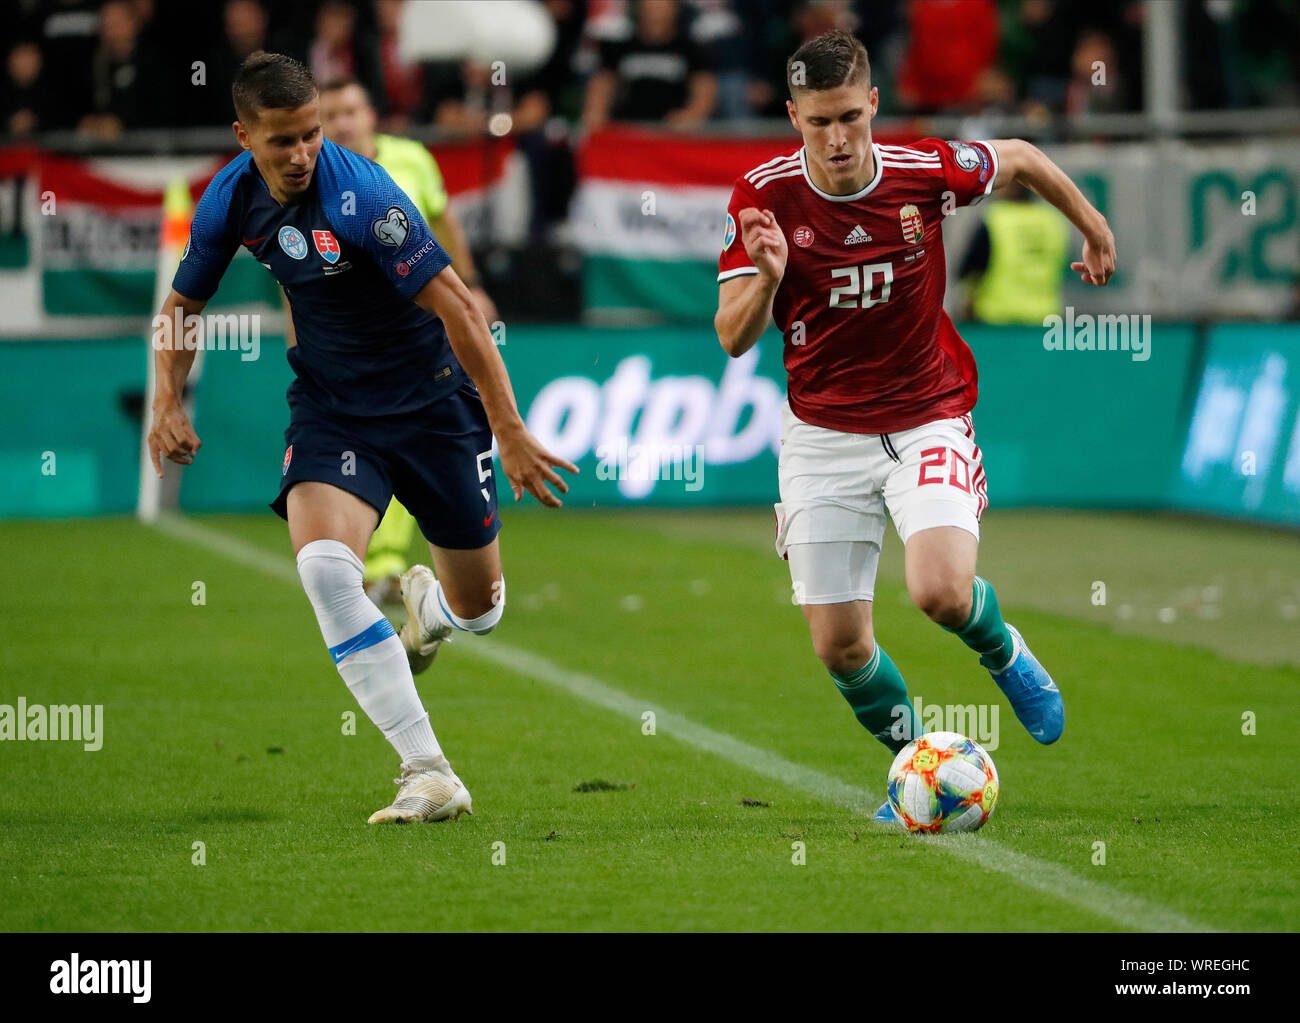 BUDAPEST, HUNGARY - SEPTEMBER 9: (r-l) Roland Sallai of Hungary controls the ball beside Lubomir Satka of Slovakia during the 2020 UEFA European Championships group E qualifying match between Hungary and Slovakia at Groupama Arena on September 9, 2019 in Budapest, Hungary. Stock Photo